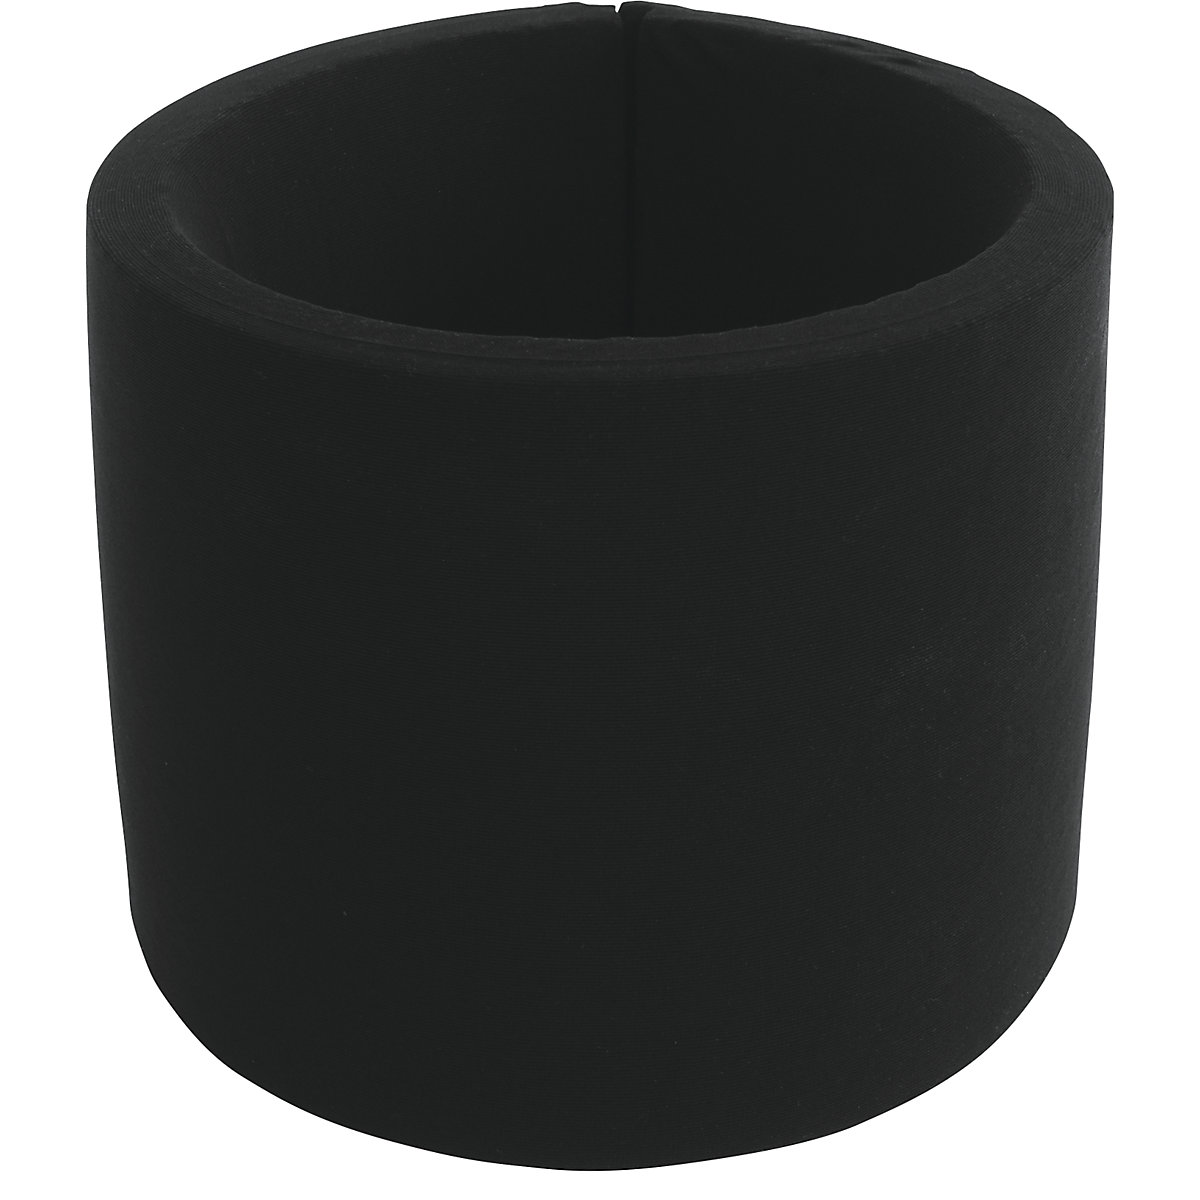 Activated carbon filter insert – IDEAL